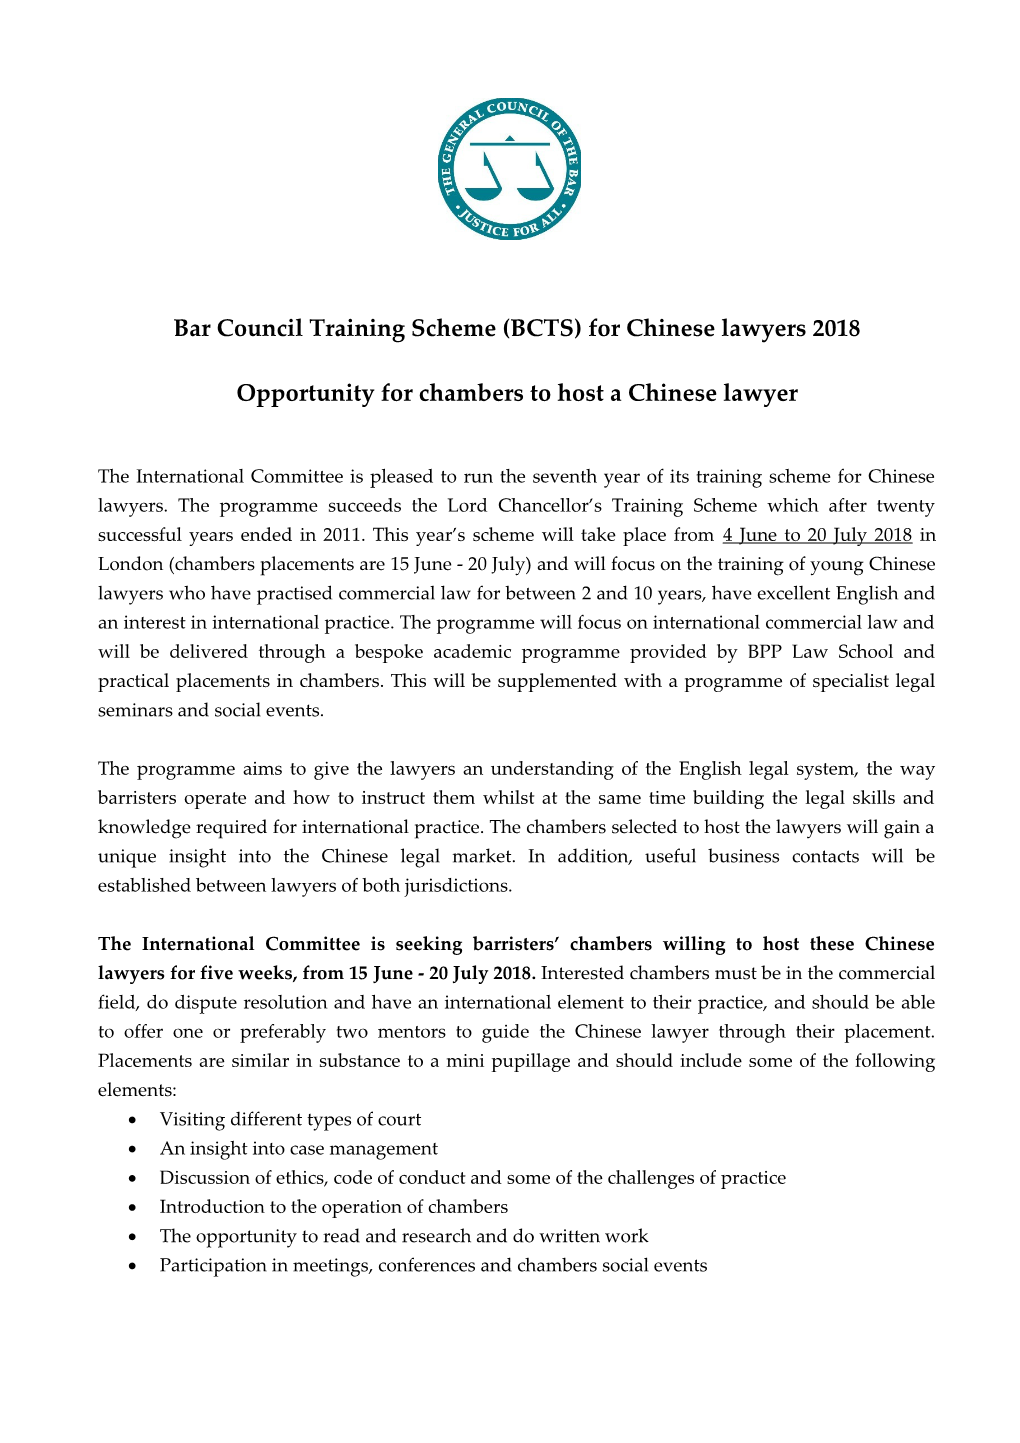 Bar Council Training Scheme (BCTS) for Chinese Lawyers 2018